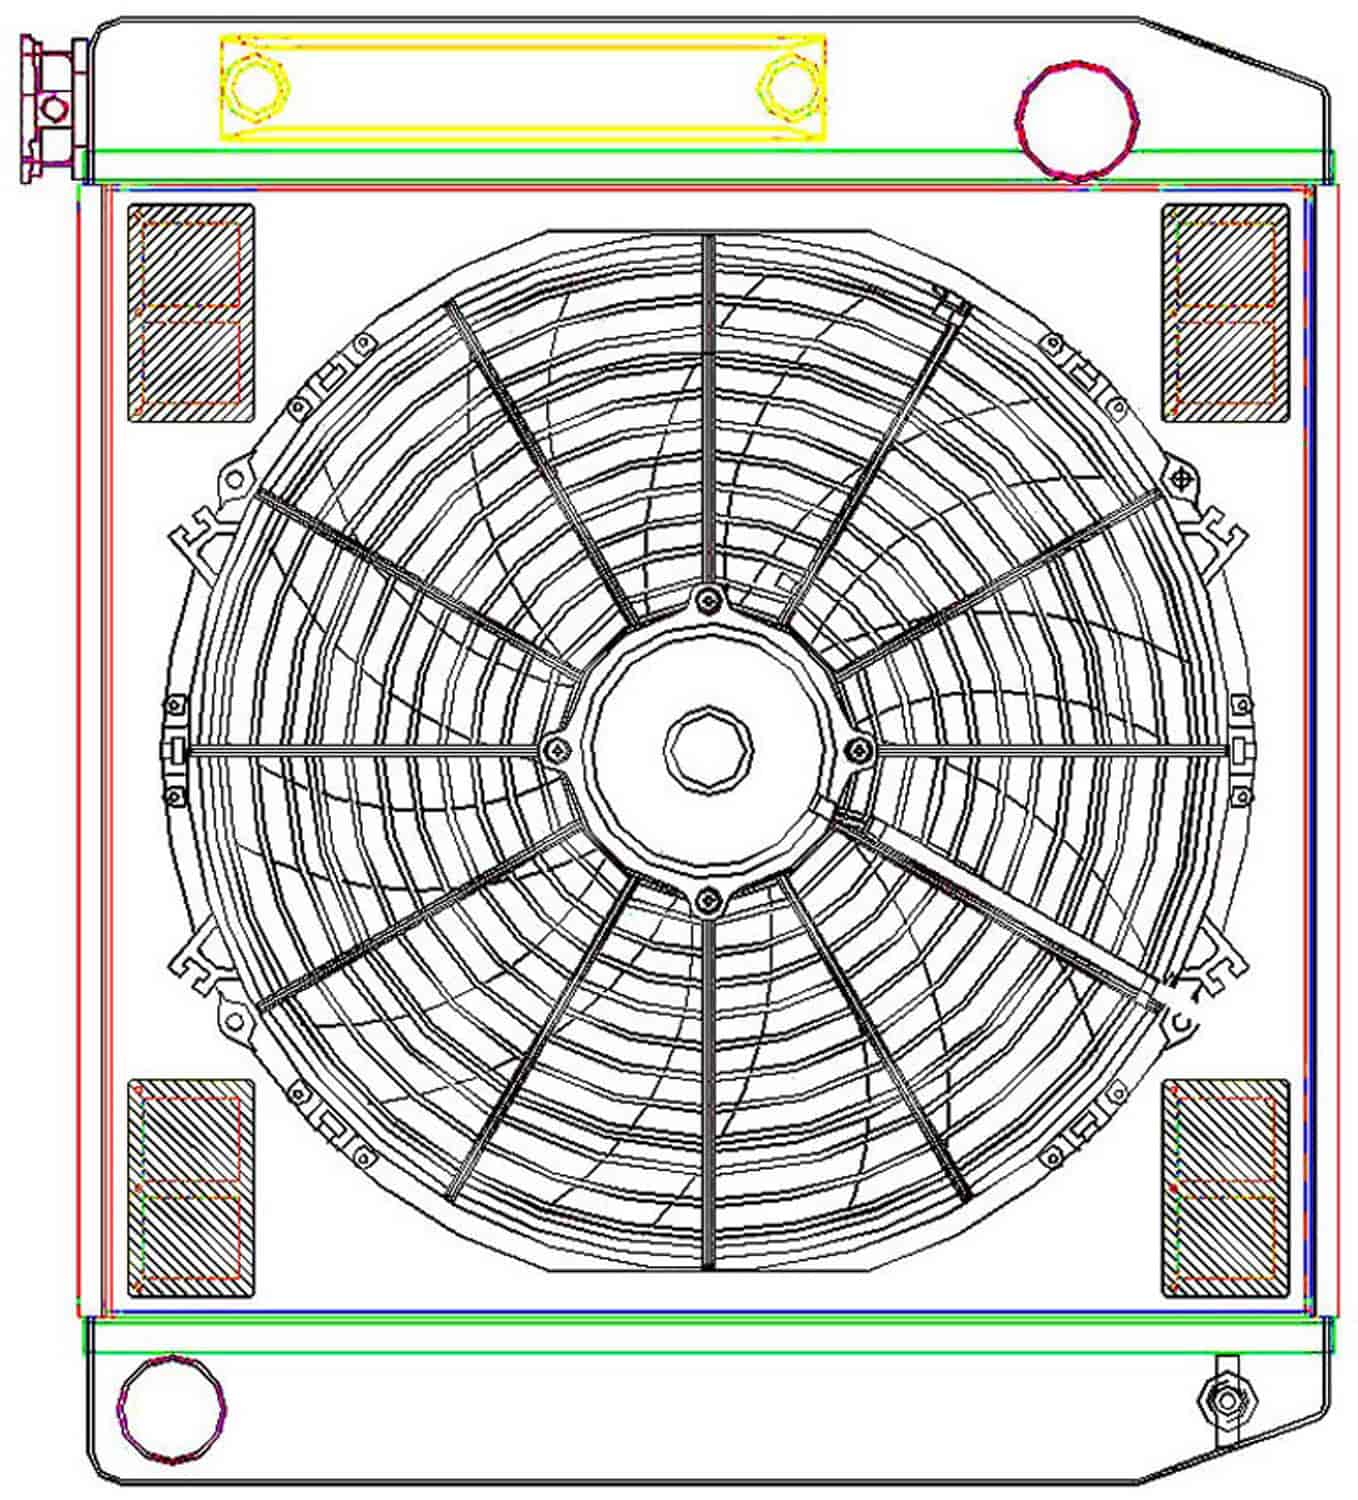 MegaCool ComboUnit Universal Fit Radiator and Fan Single Pass Crossflow Design 22" x 19" with Transmission Cooler